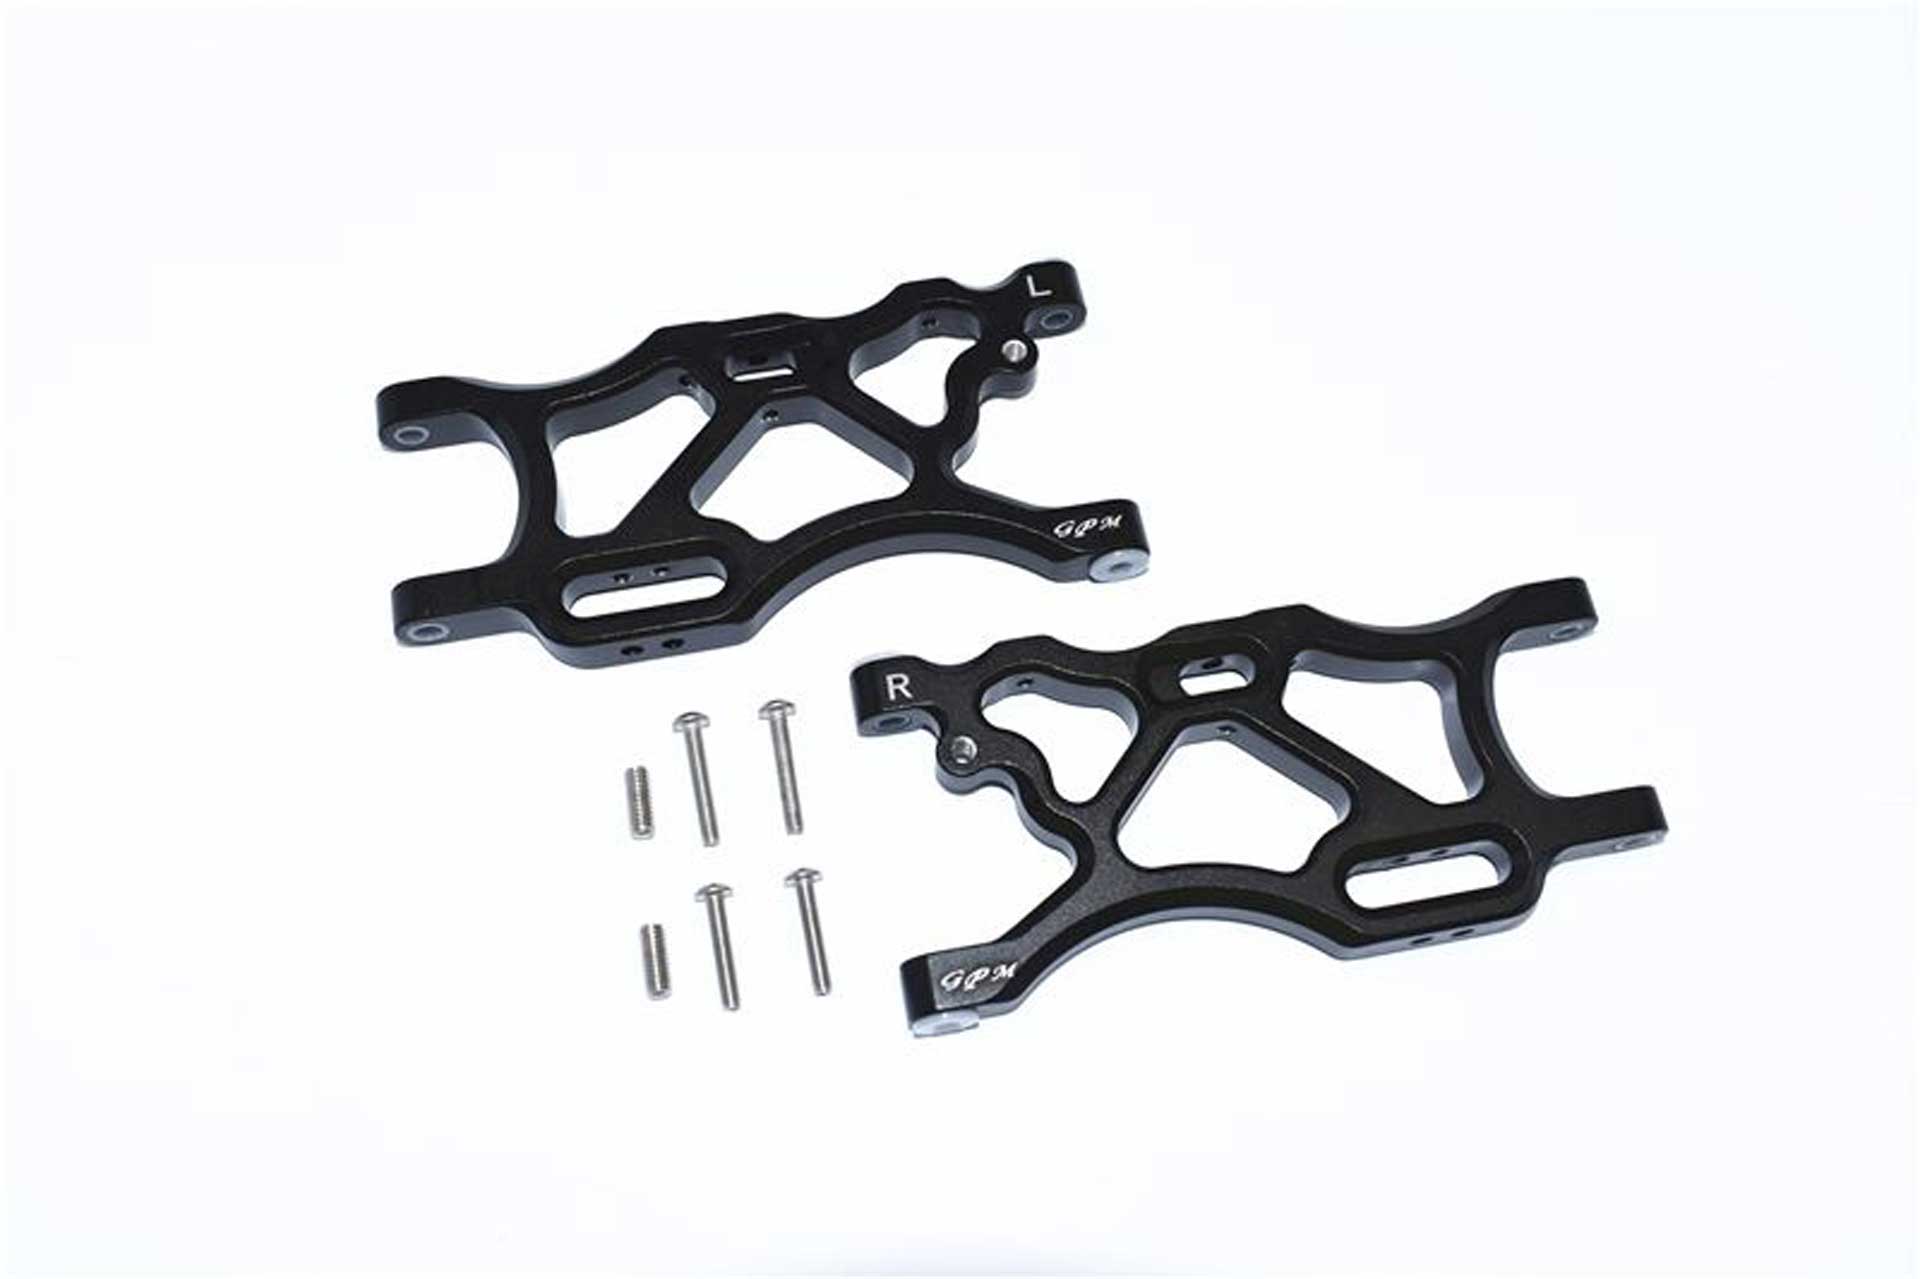 GPM ALUMINUM REAR LOWER ARMS -8PC SET black GPM ARRMA LIMITLESS INFRACTION TYPHON